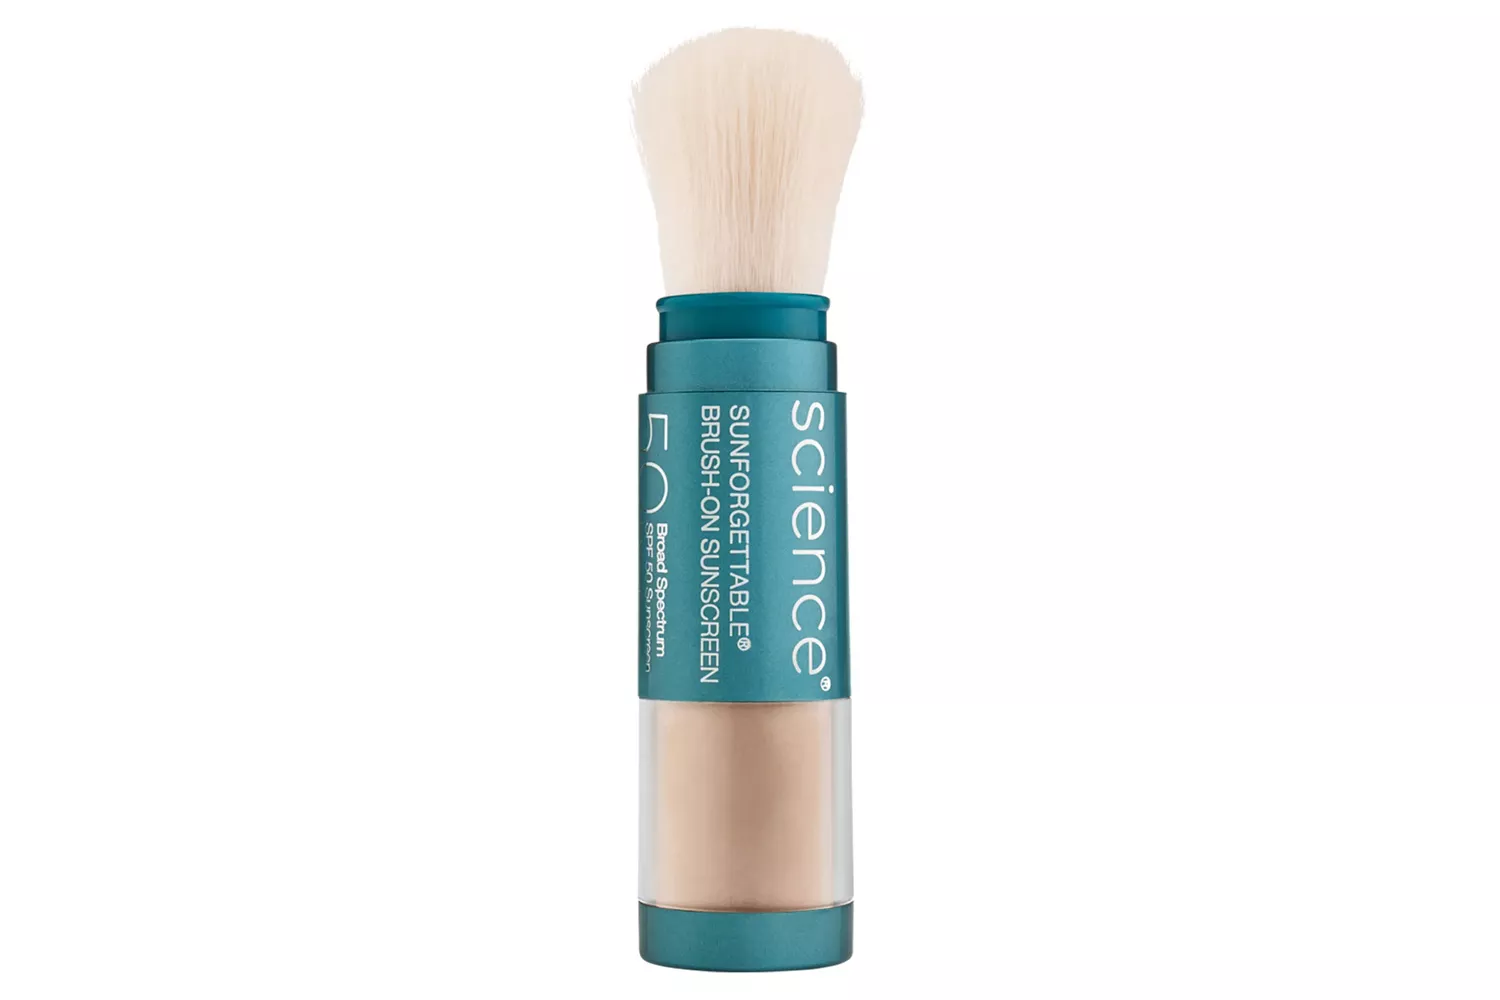 Colorscience Sunforgettable Total Protection Brush-On Shield SPF 50